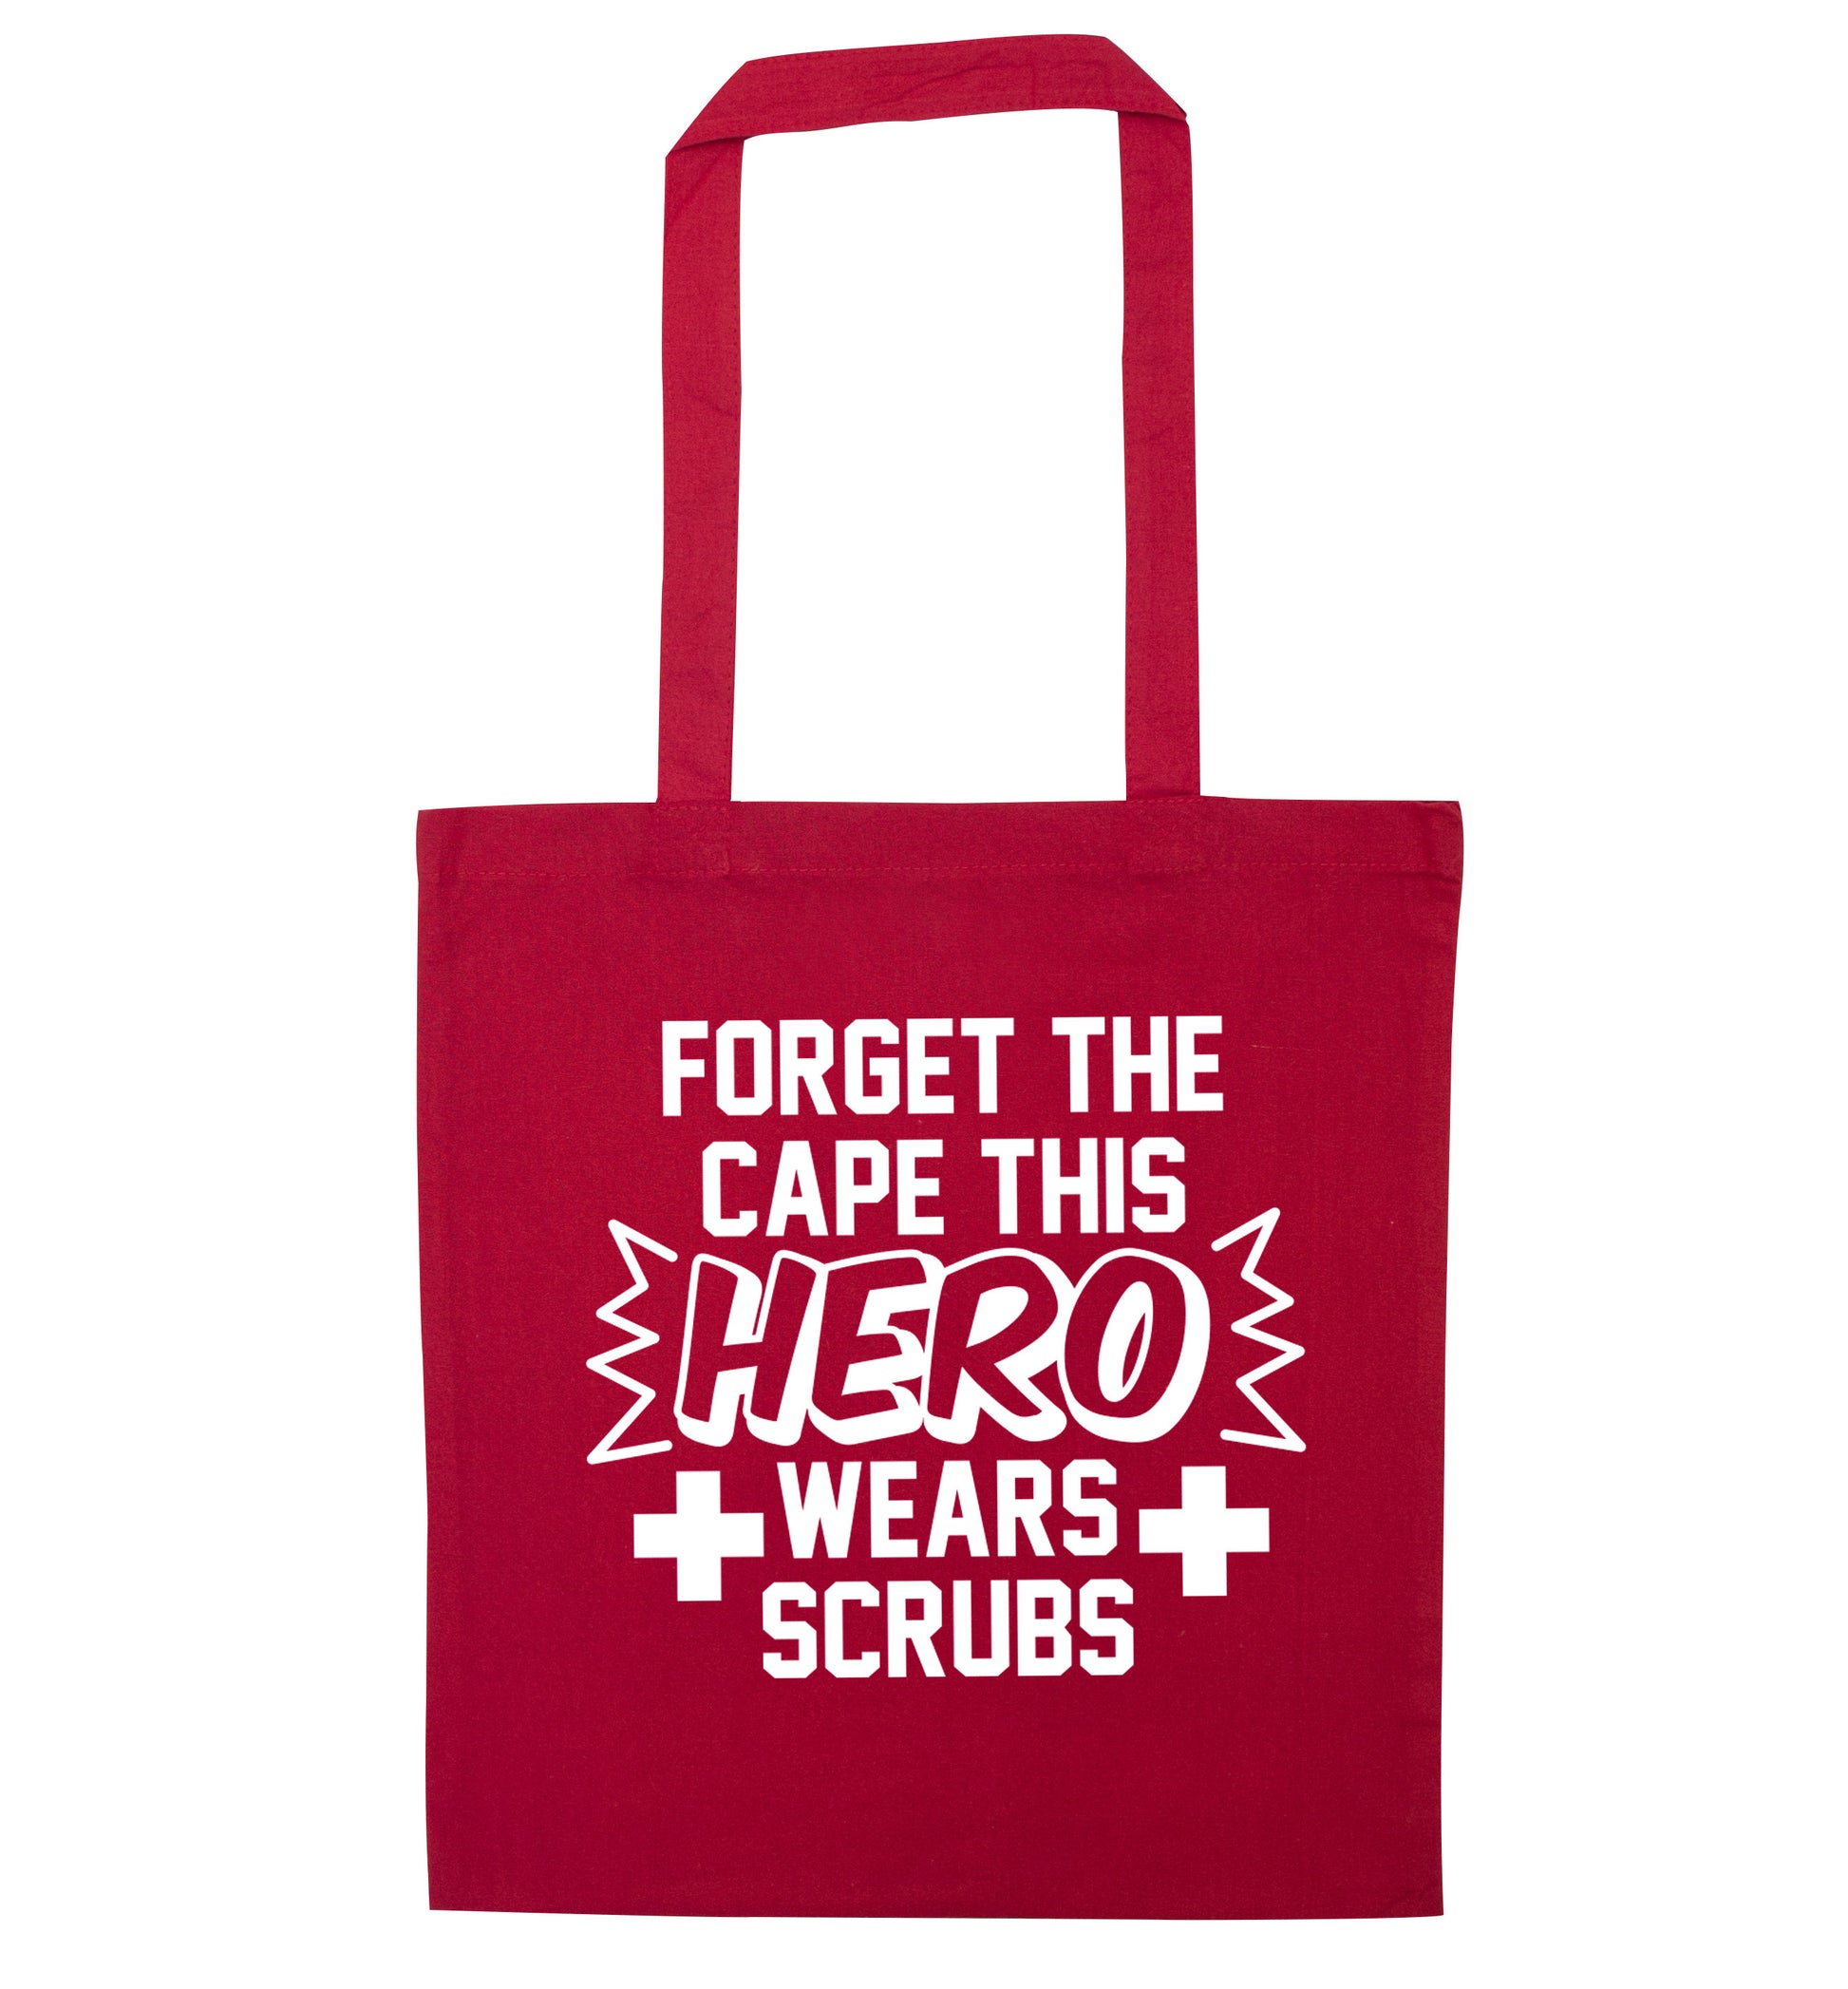 Forget the cape this hero wears scrubs red tote bag